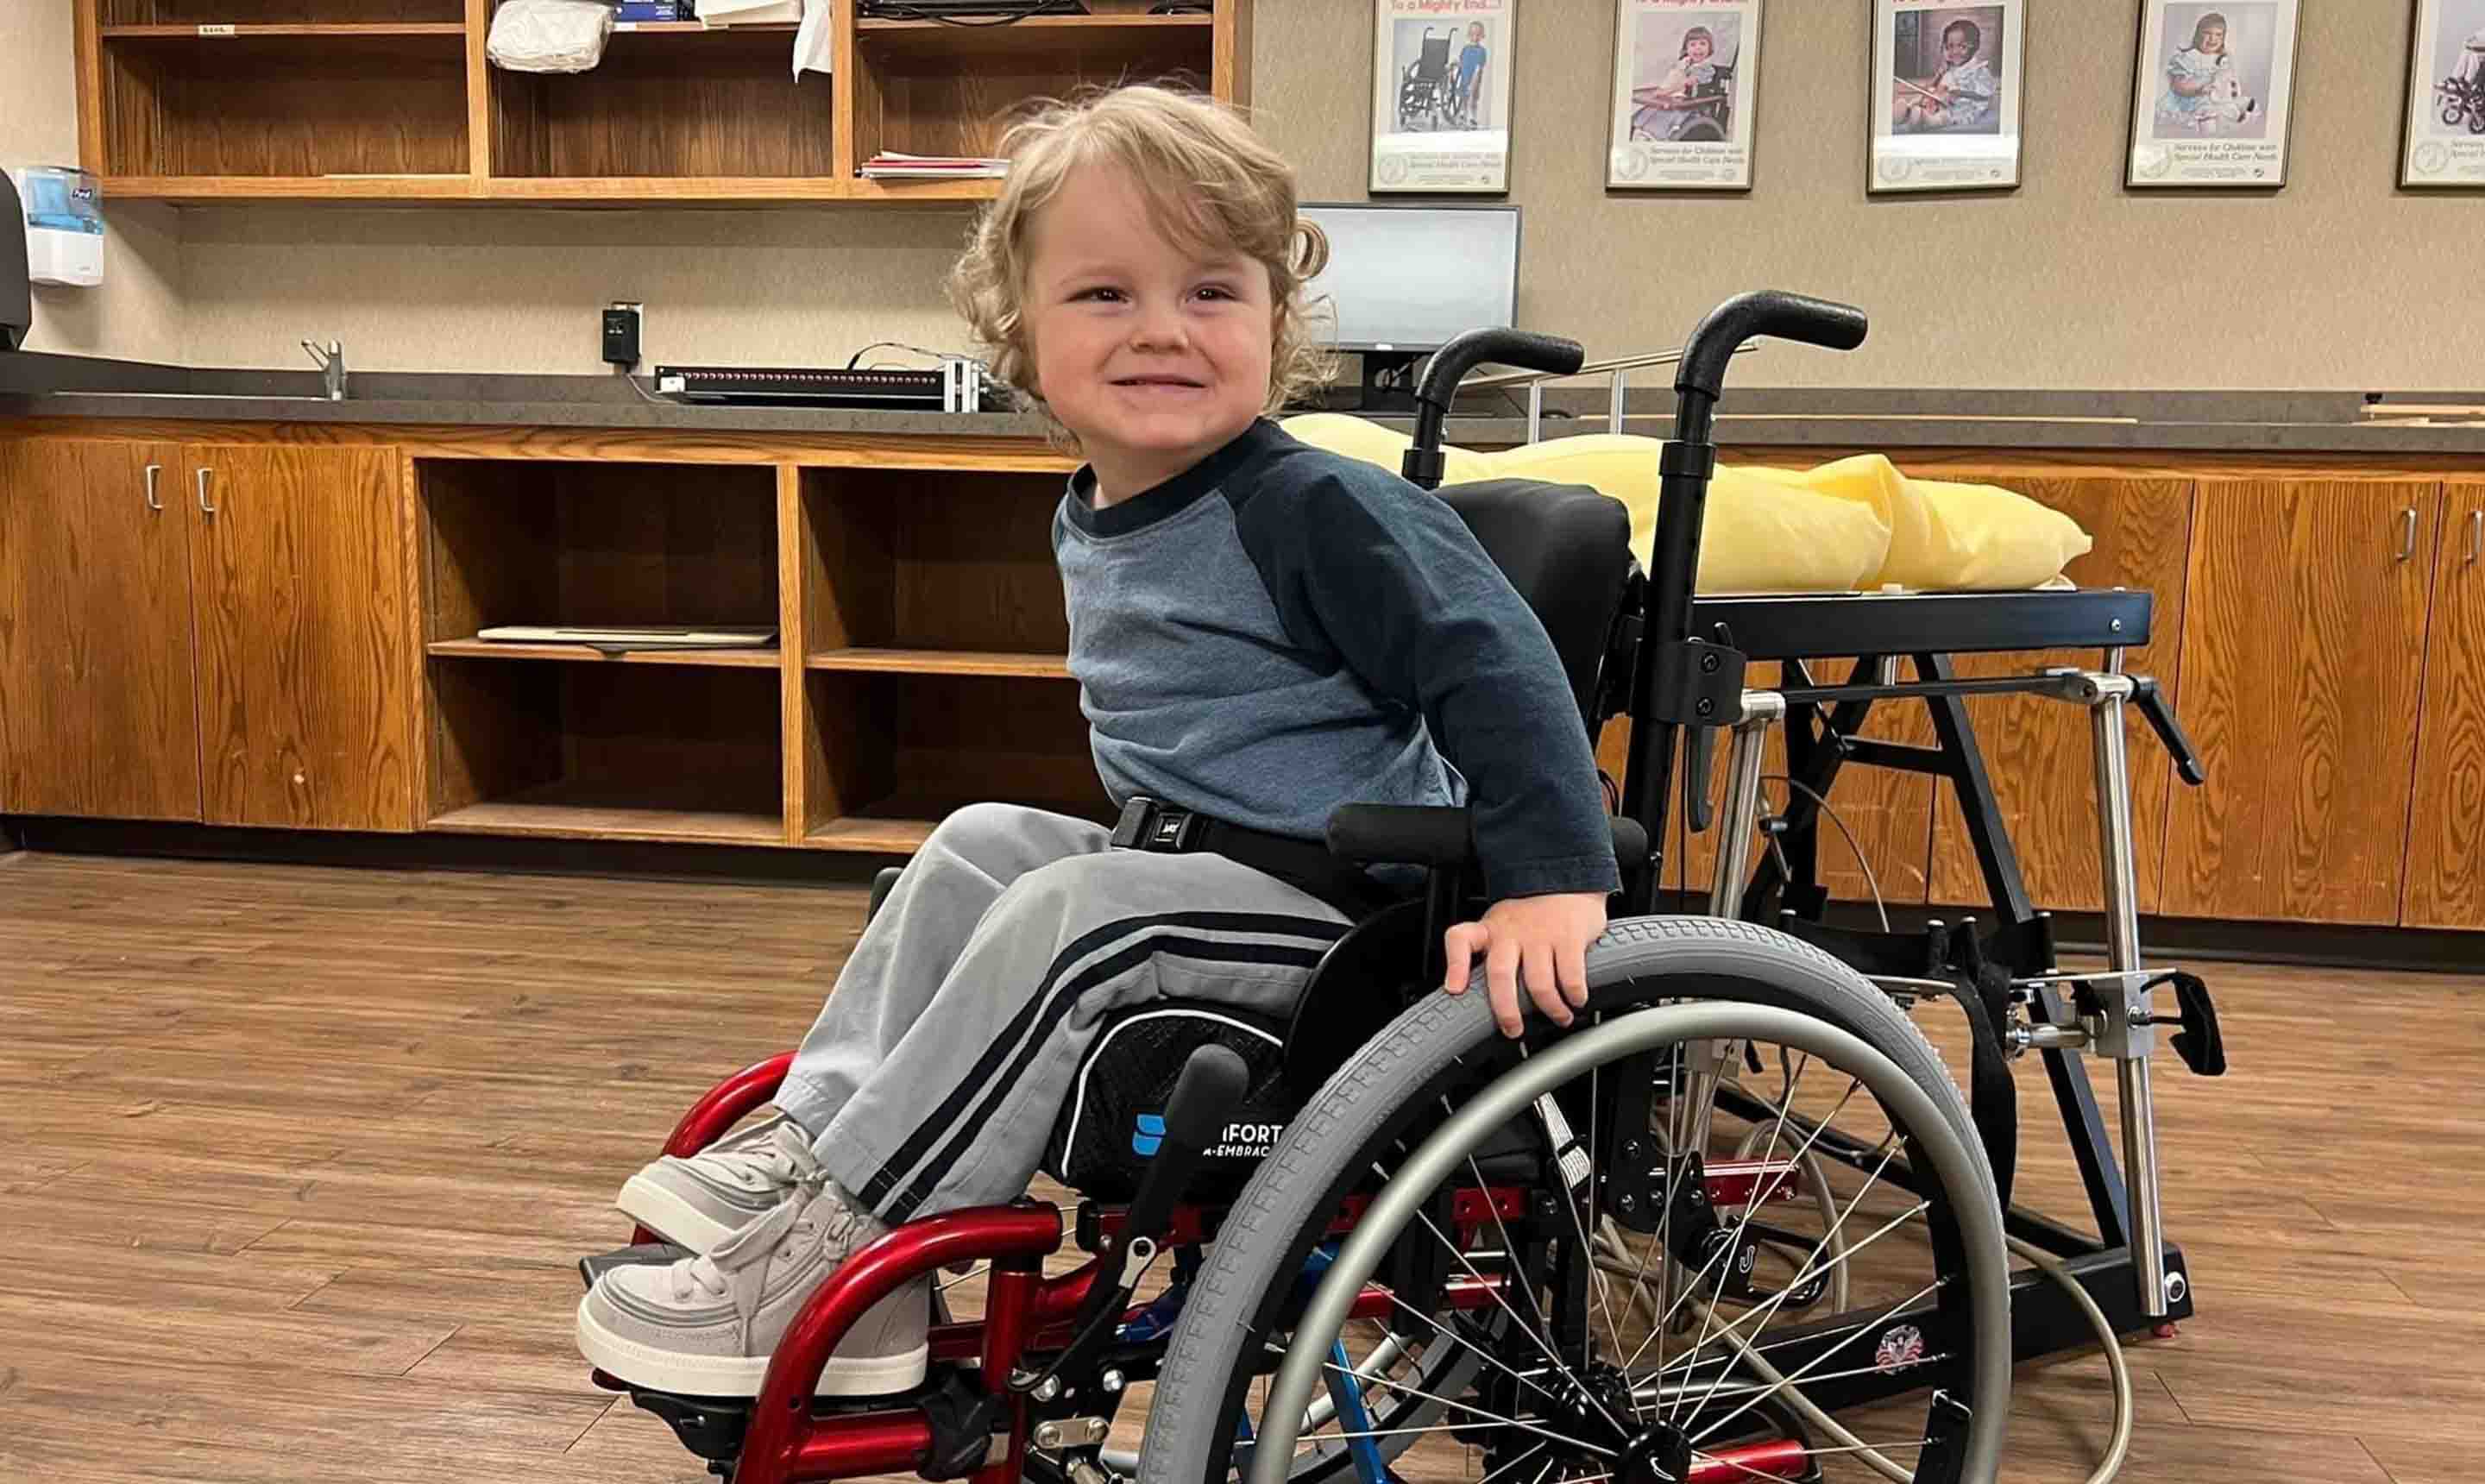 A young Wheelchair Clinic client is inside an exam room, seated in his red manual wheelchair and smiling towards the camera.